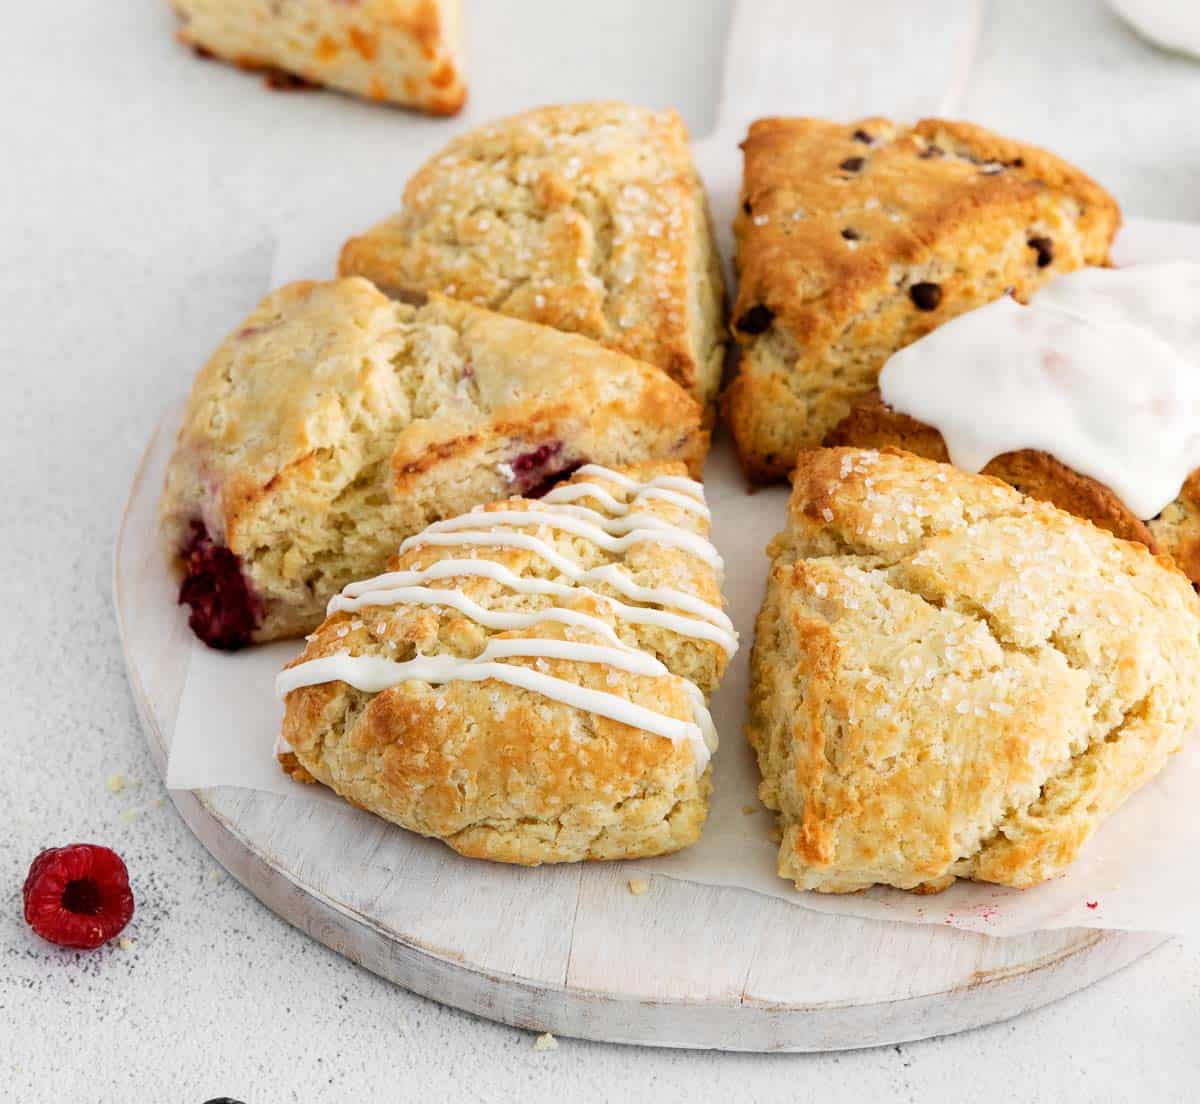 variations of gluten-free scones on a plate